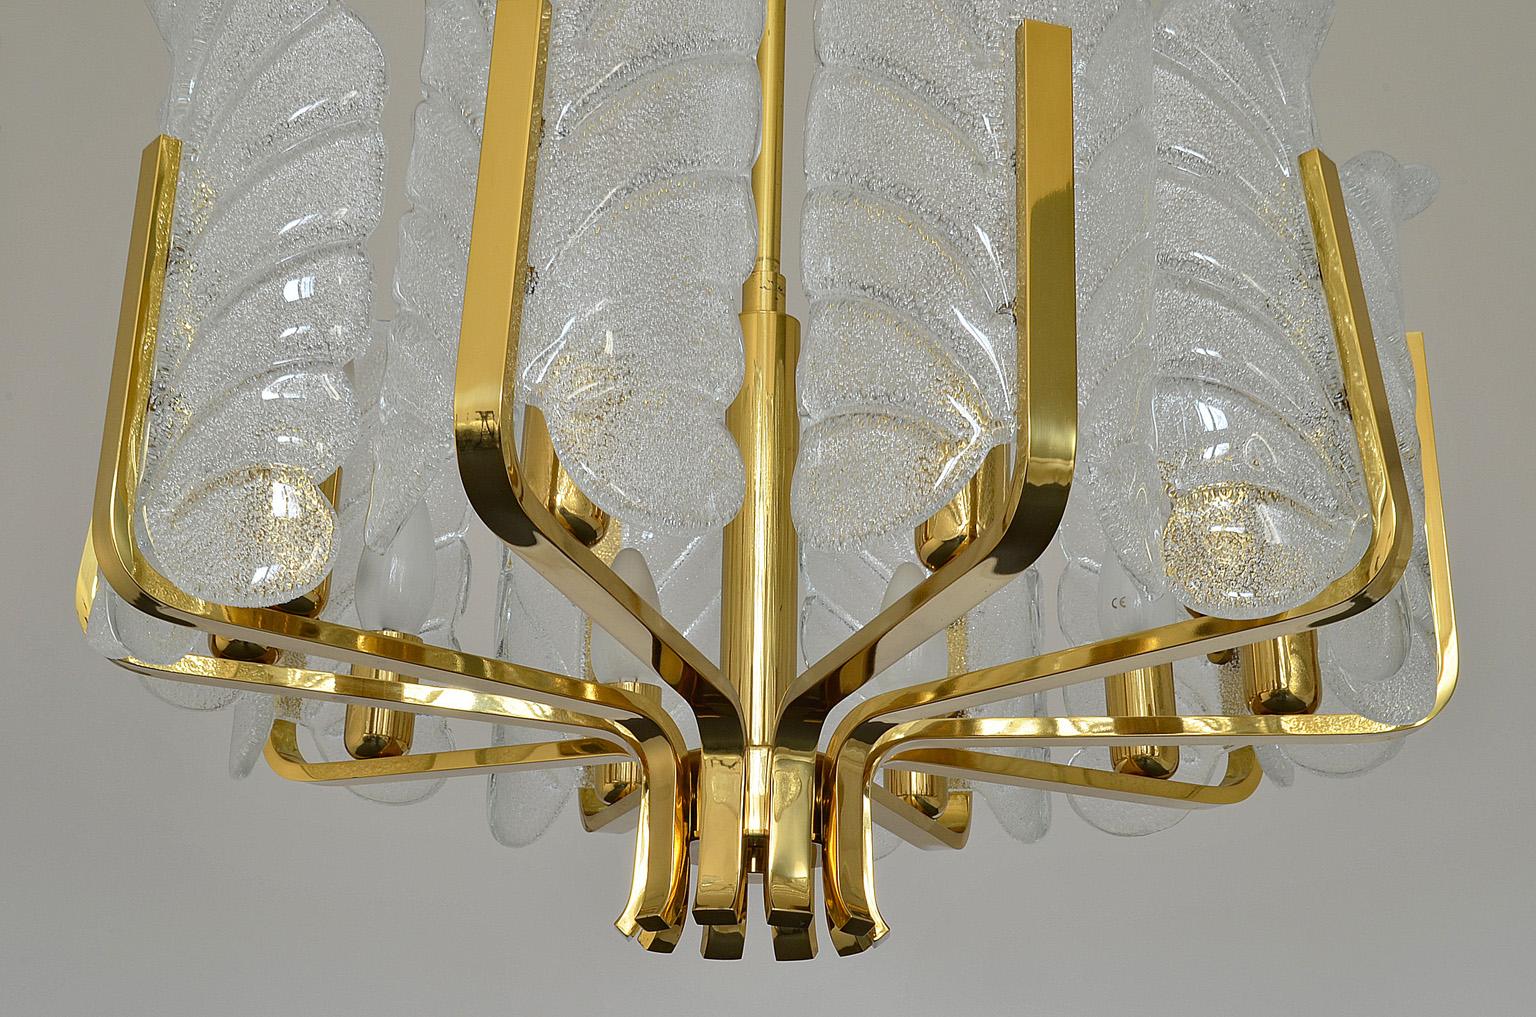 Chandelier by Carl Fagerlund for Orrefors 1960s Gold Brass Glass Acanthus Leaves im Zustand „Gut“ im Angebot in Nürnberg, Bavaria